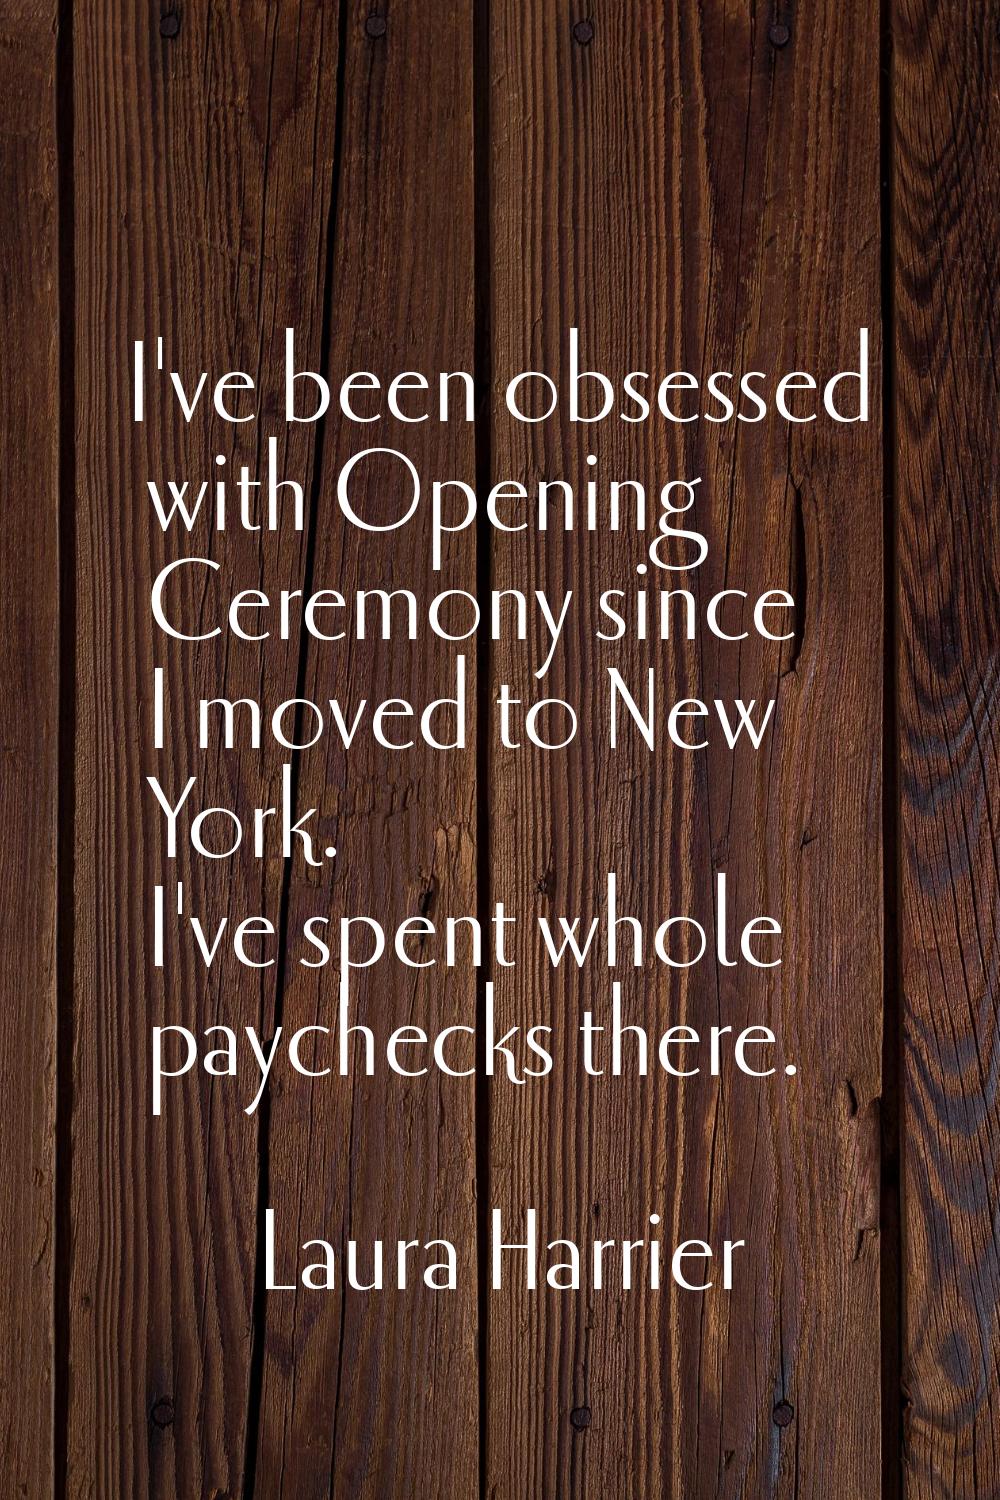 I've been obsessed with Opening Ceremony since I moved to New York. I've spent whole paychecks ther